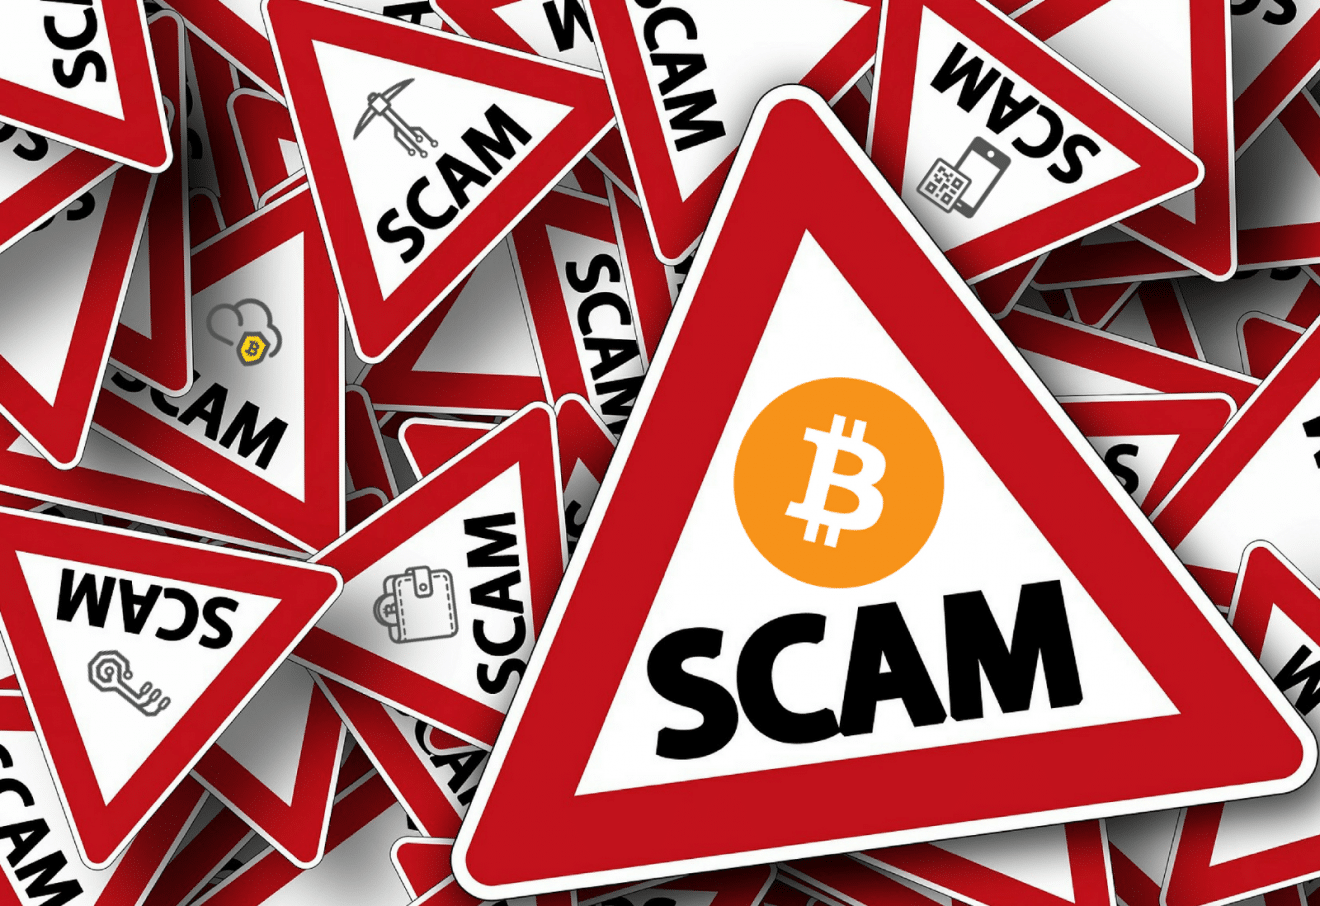 Types of Bitcoin and other cryptocurrency scams